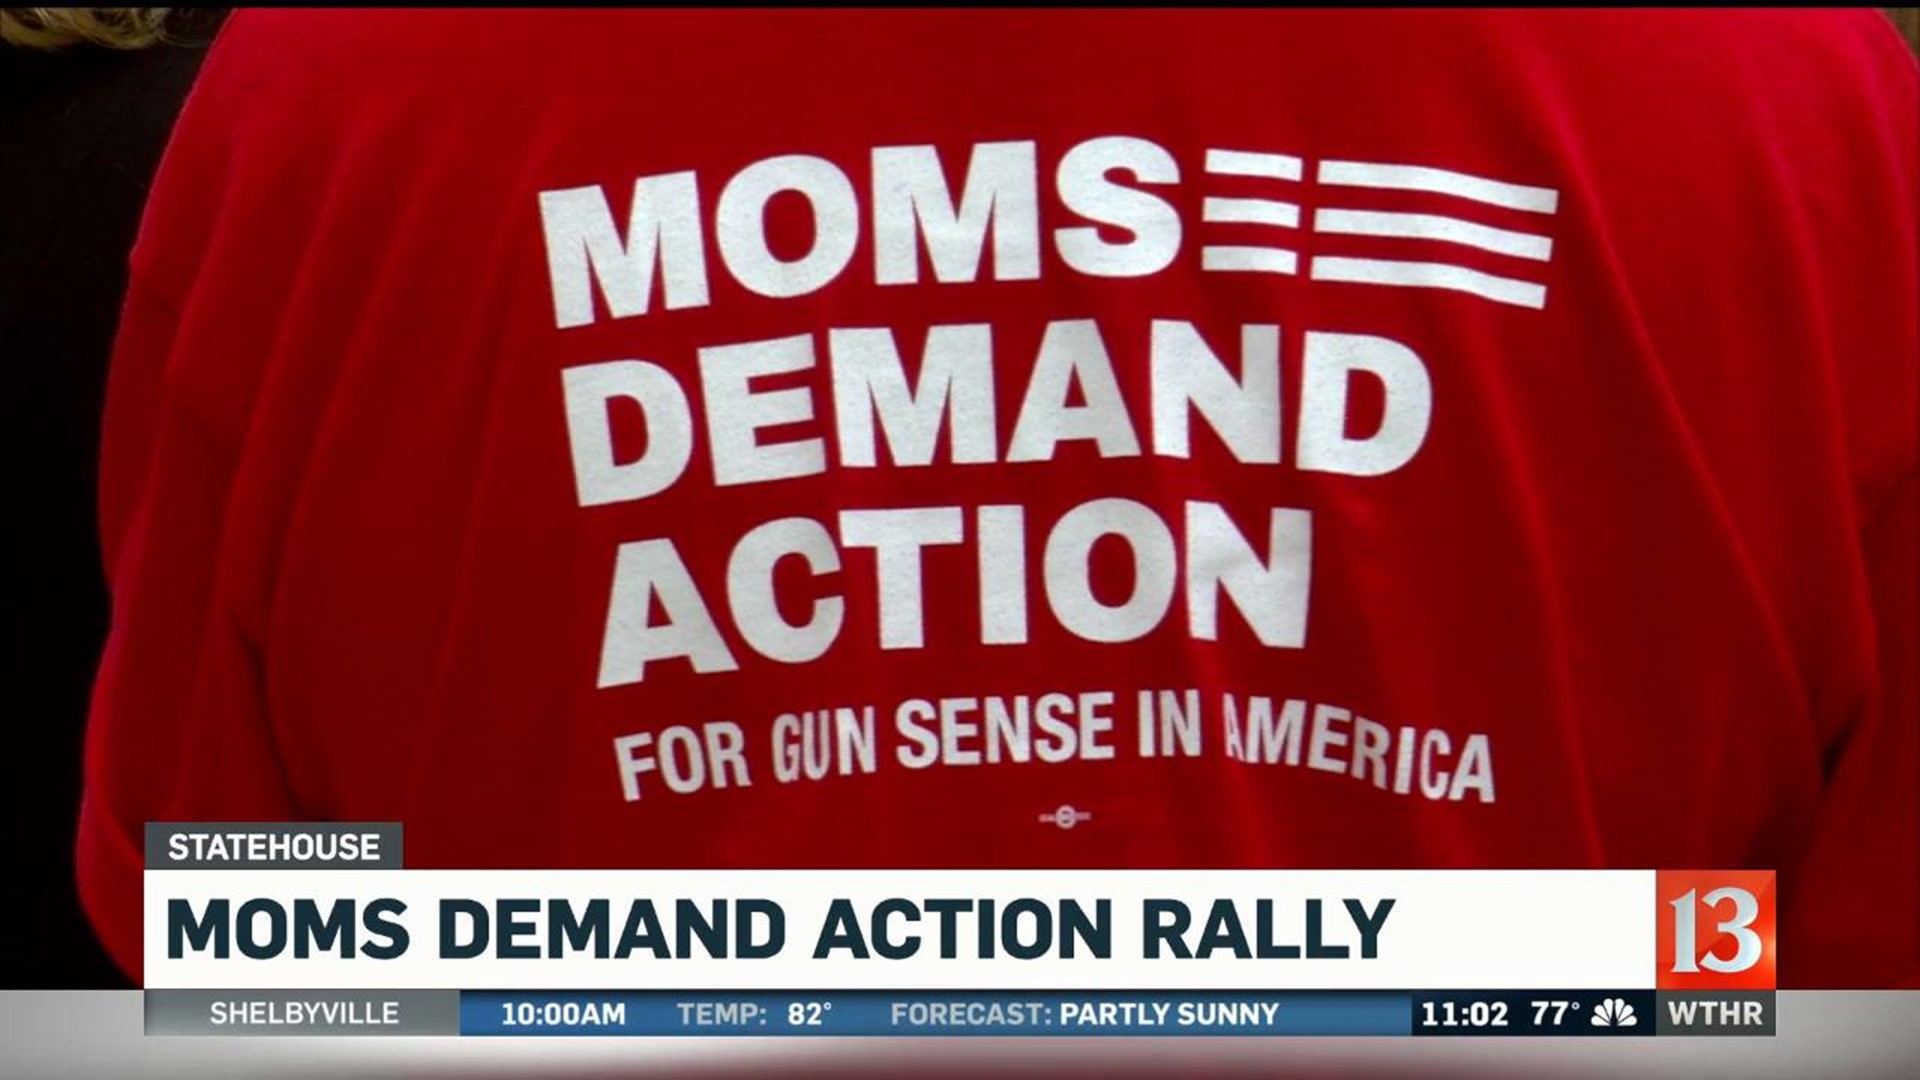 Moms demand action rally